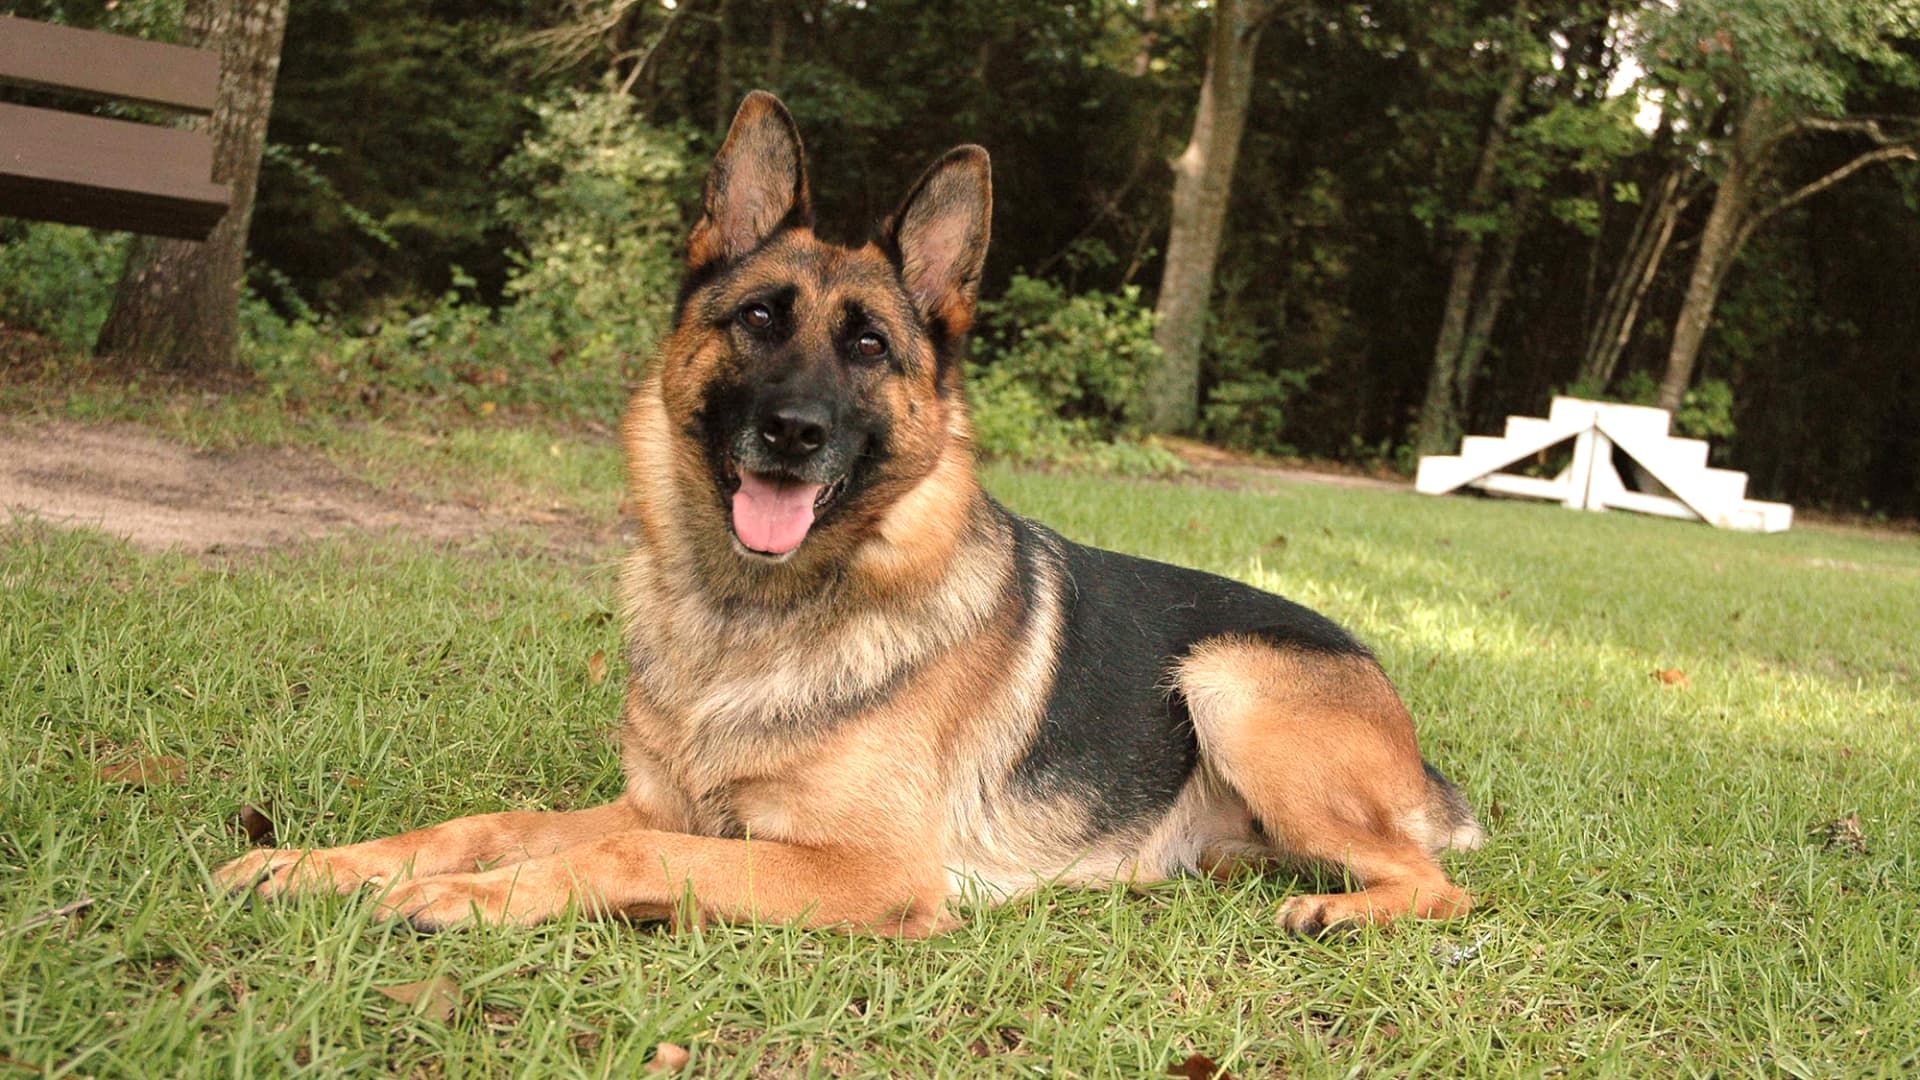 Harrison K-9's most expensive dog ever sold, Julia, who's purchase price was $230,000.